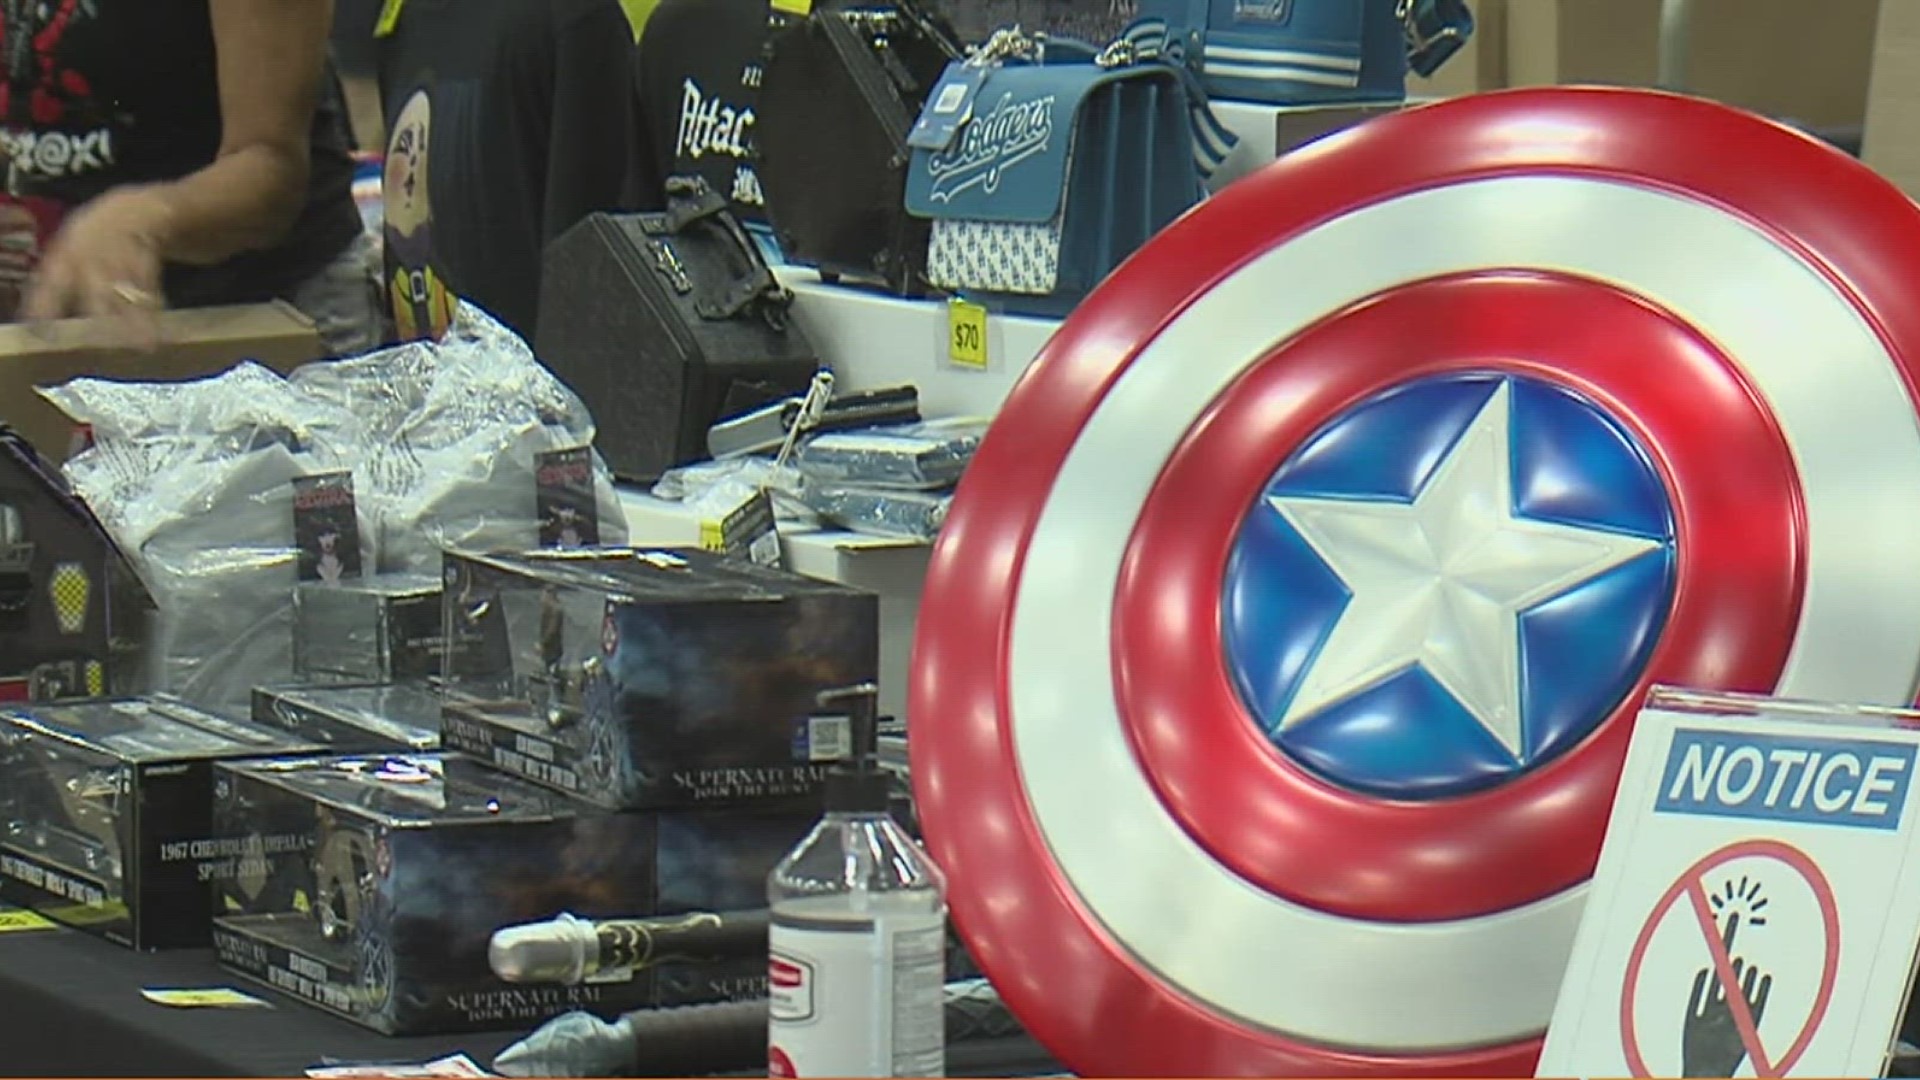 Despite the strike in Hollywood, there will be no changes for the Corpus Christi Comic Con.